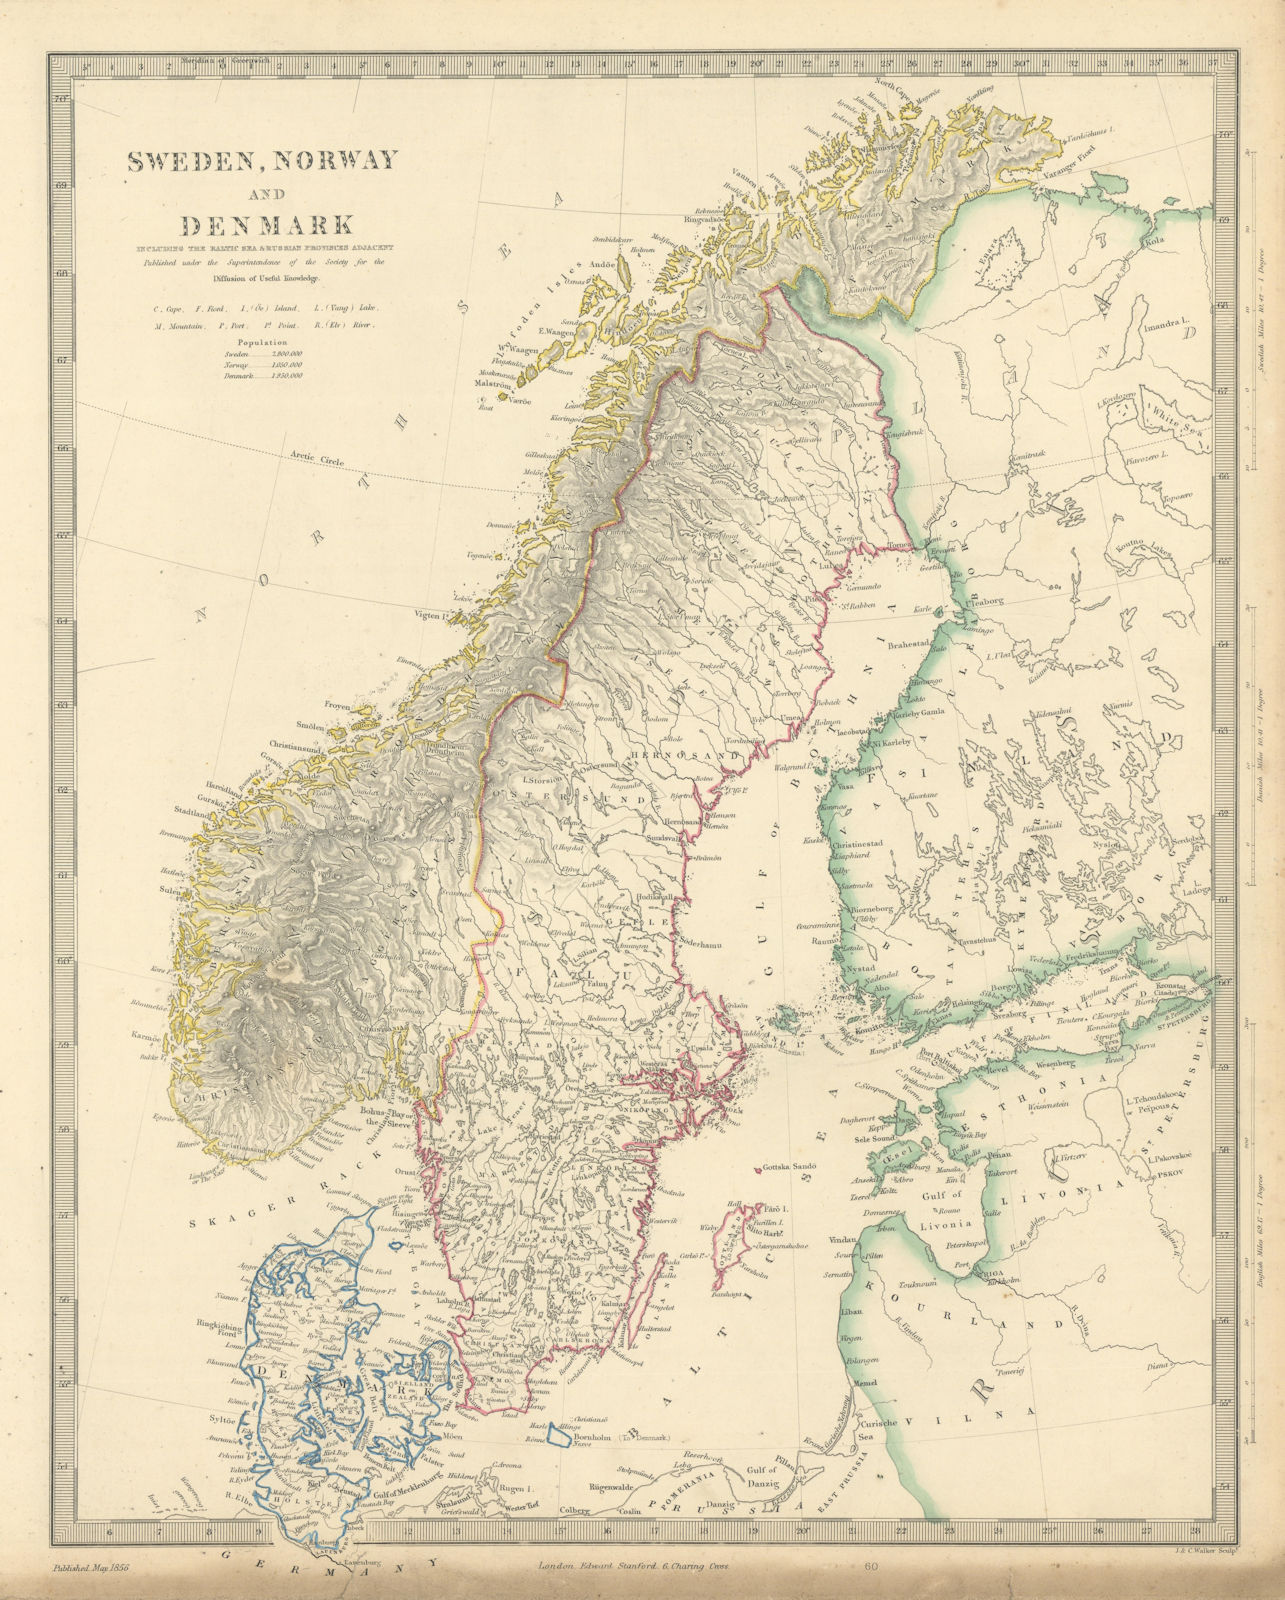 Associate Product SCANDINAVIA. Sweden, Norway, and Denmark. Population table. SDUK 1856 old map